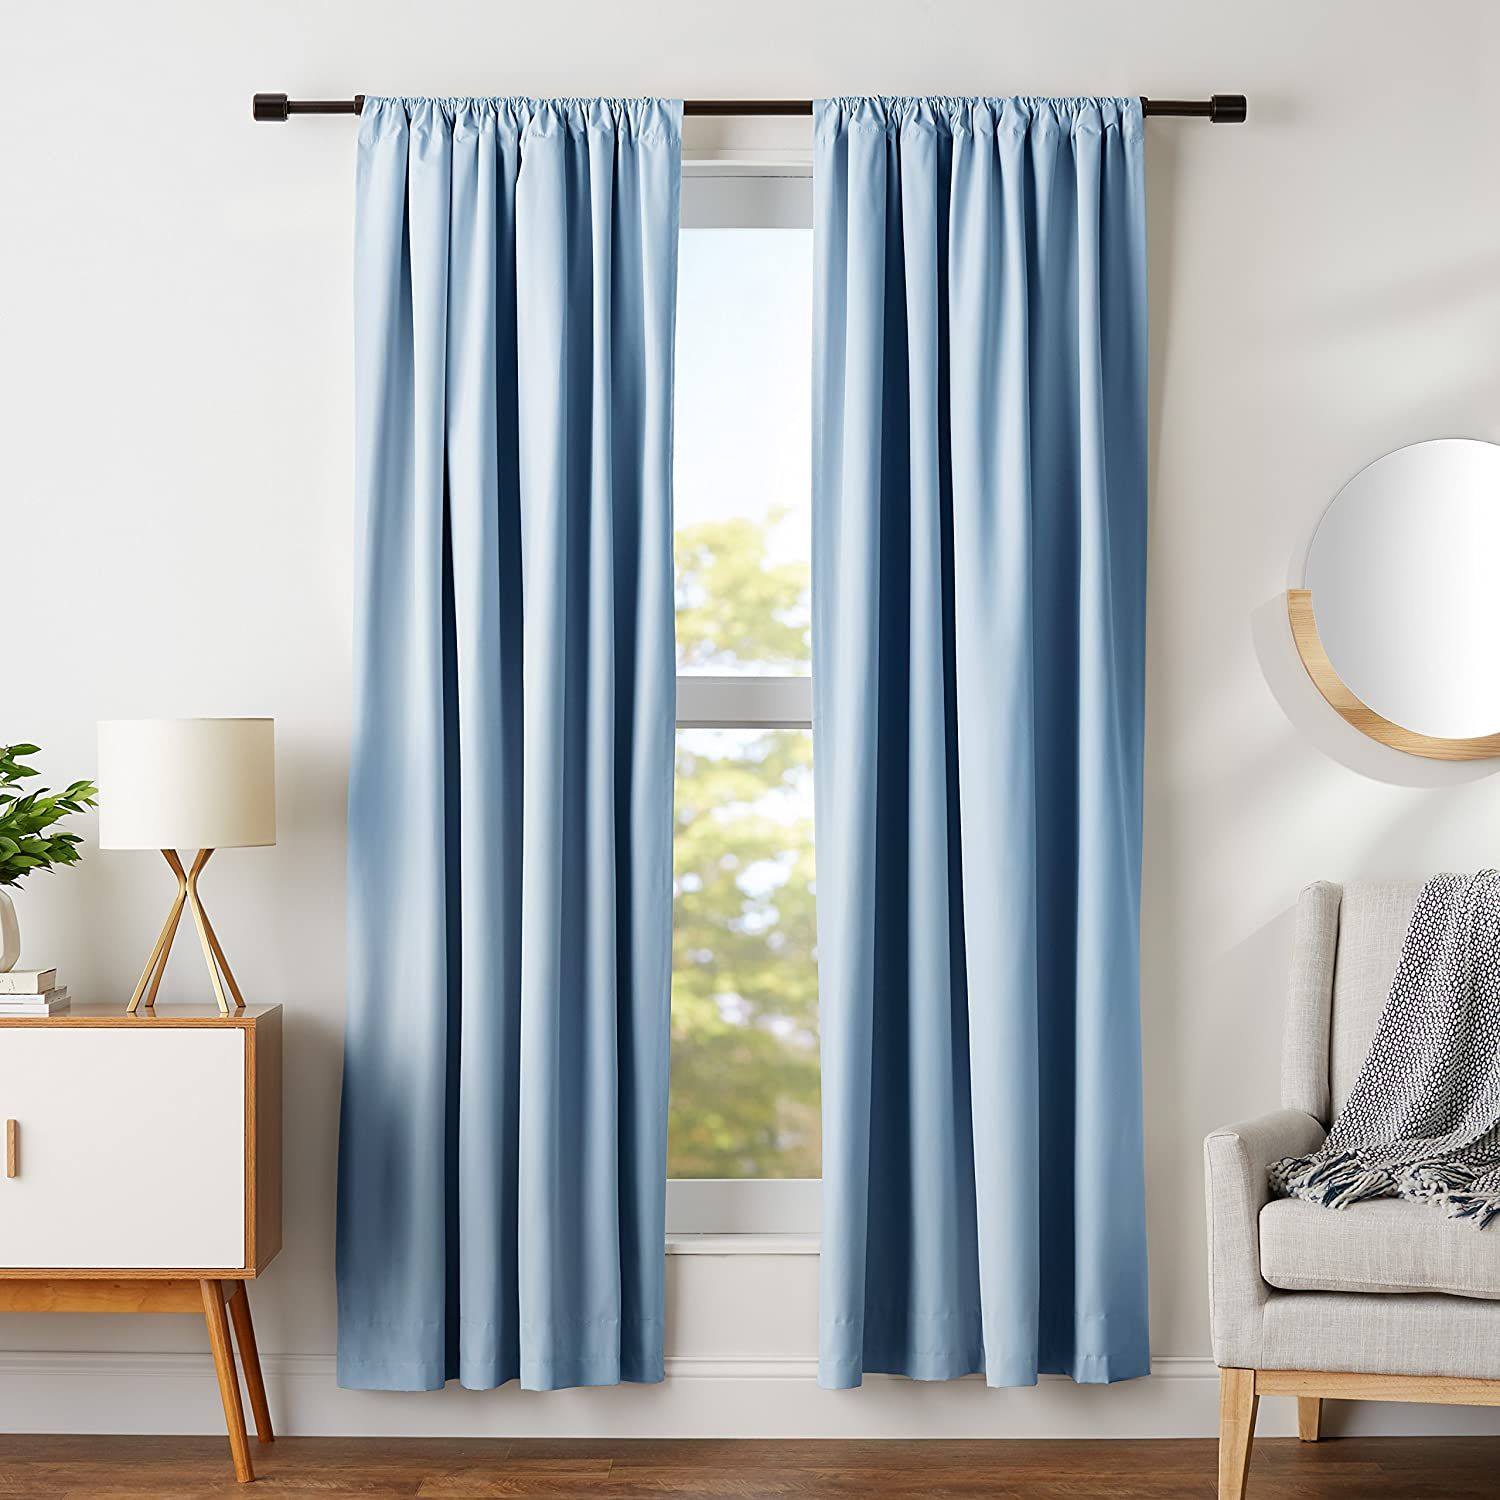 sky blue curtains for bedroom